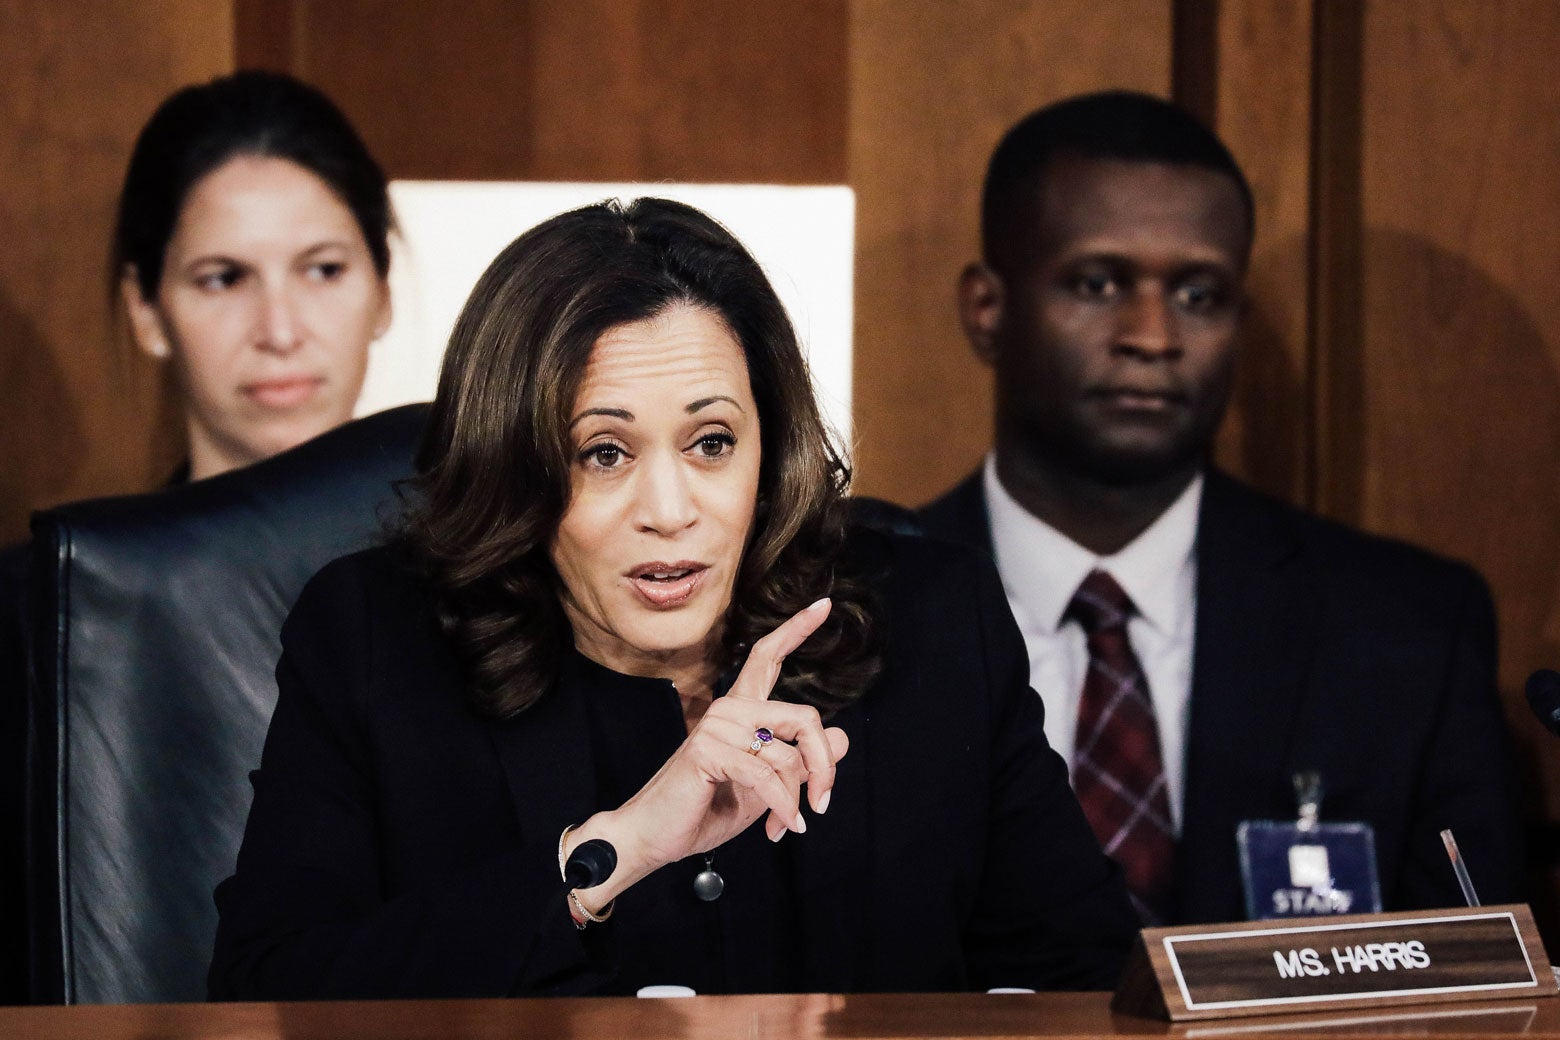 Sen. Kamala Harris questions Supreme Court nominee Judge Brett Kavanaugh on the third day of his Supreme Court confirmation hearing on Thursday.